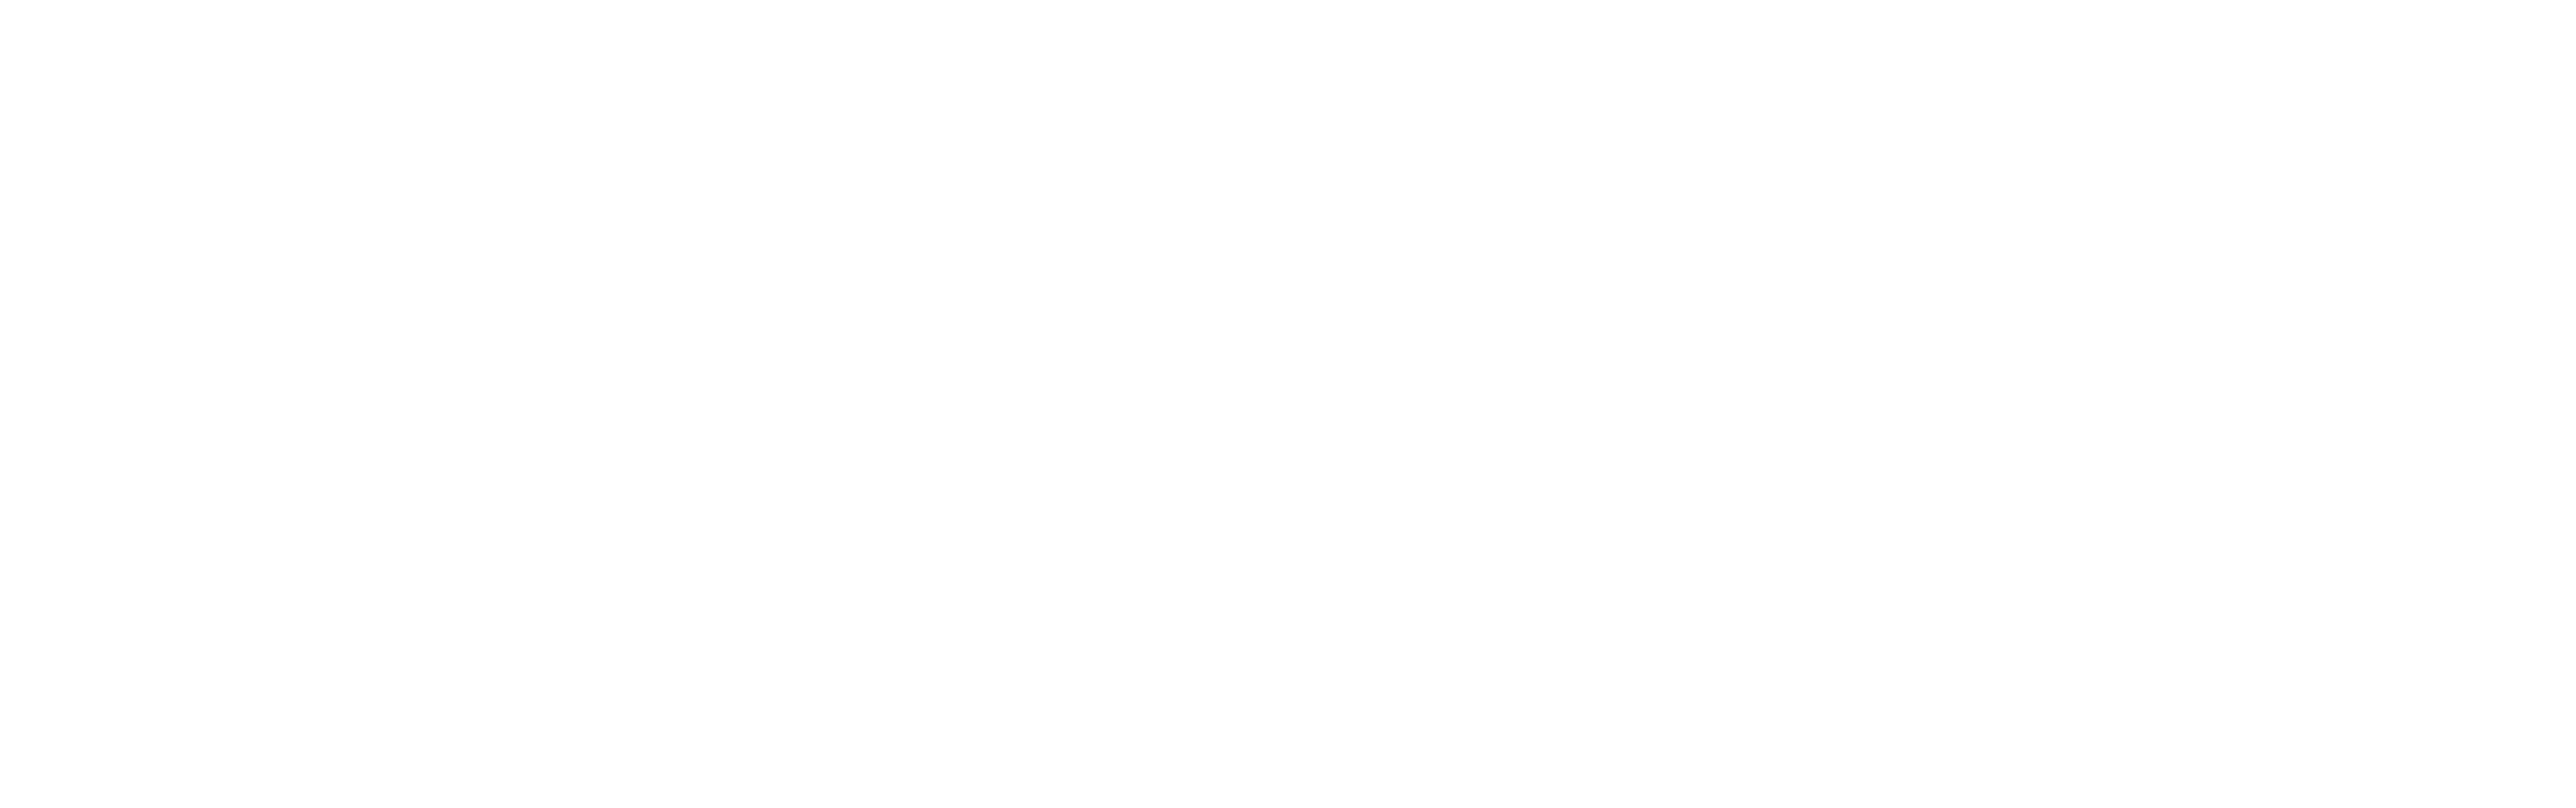 Choral Dynamics - Helping Our Community Through Song